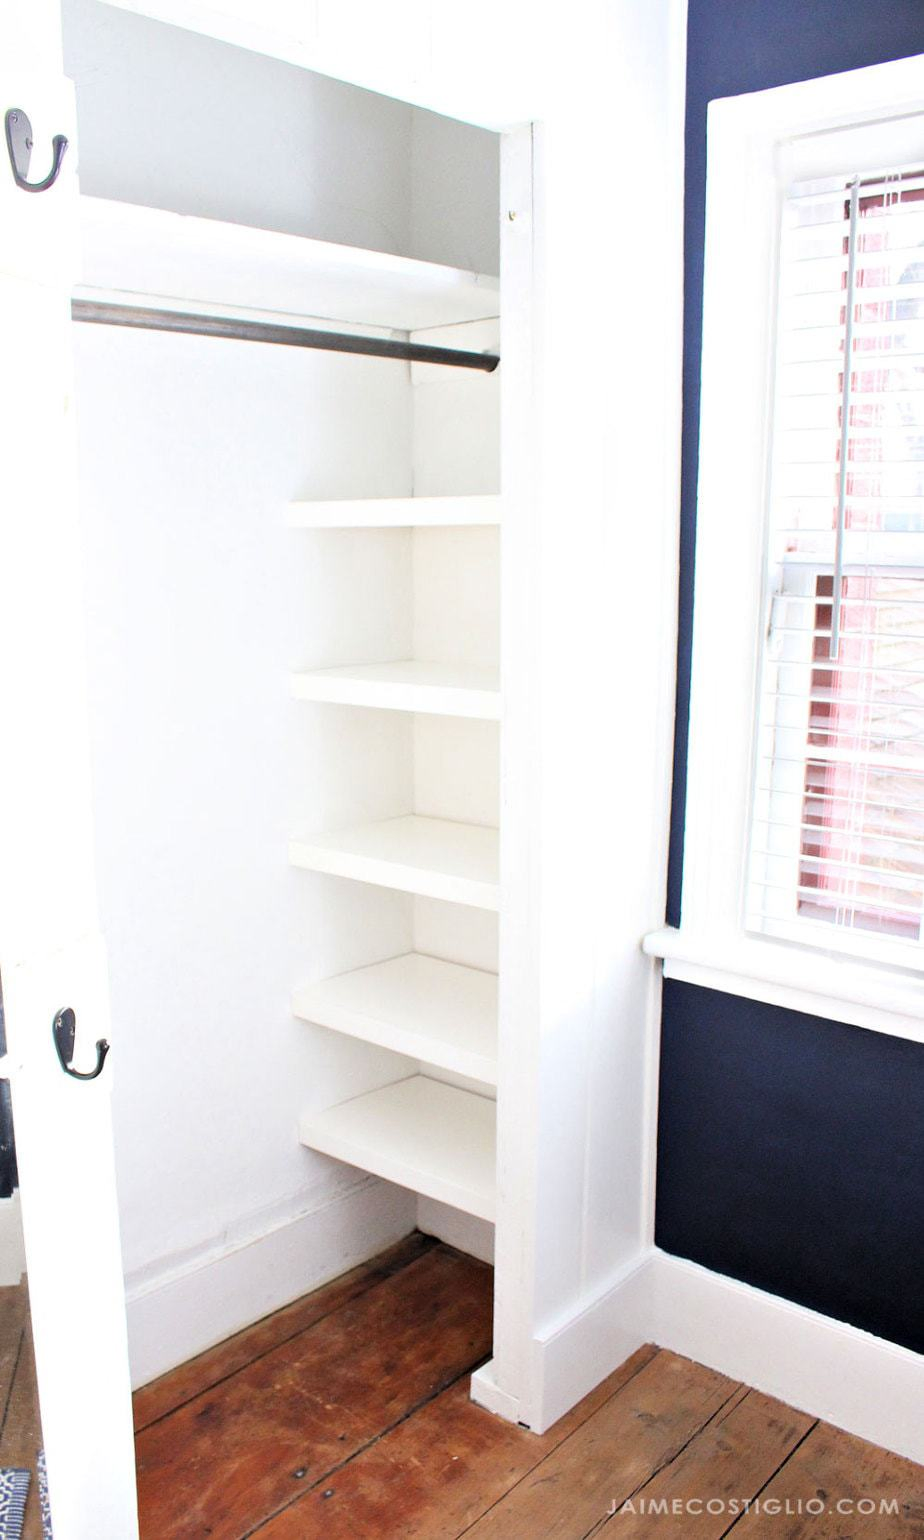 7. Try completing this EASY CLOSET SHELVES Ideas by simphome.com